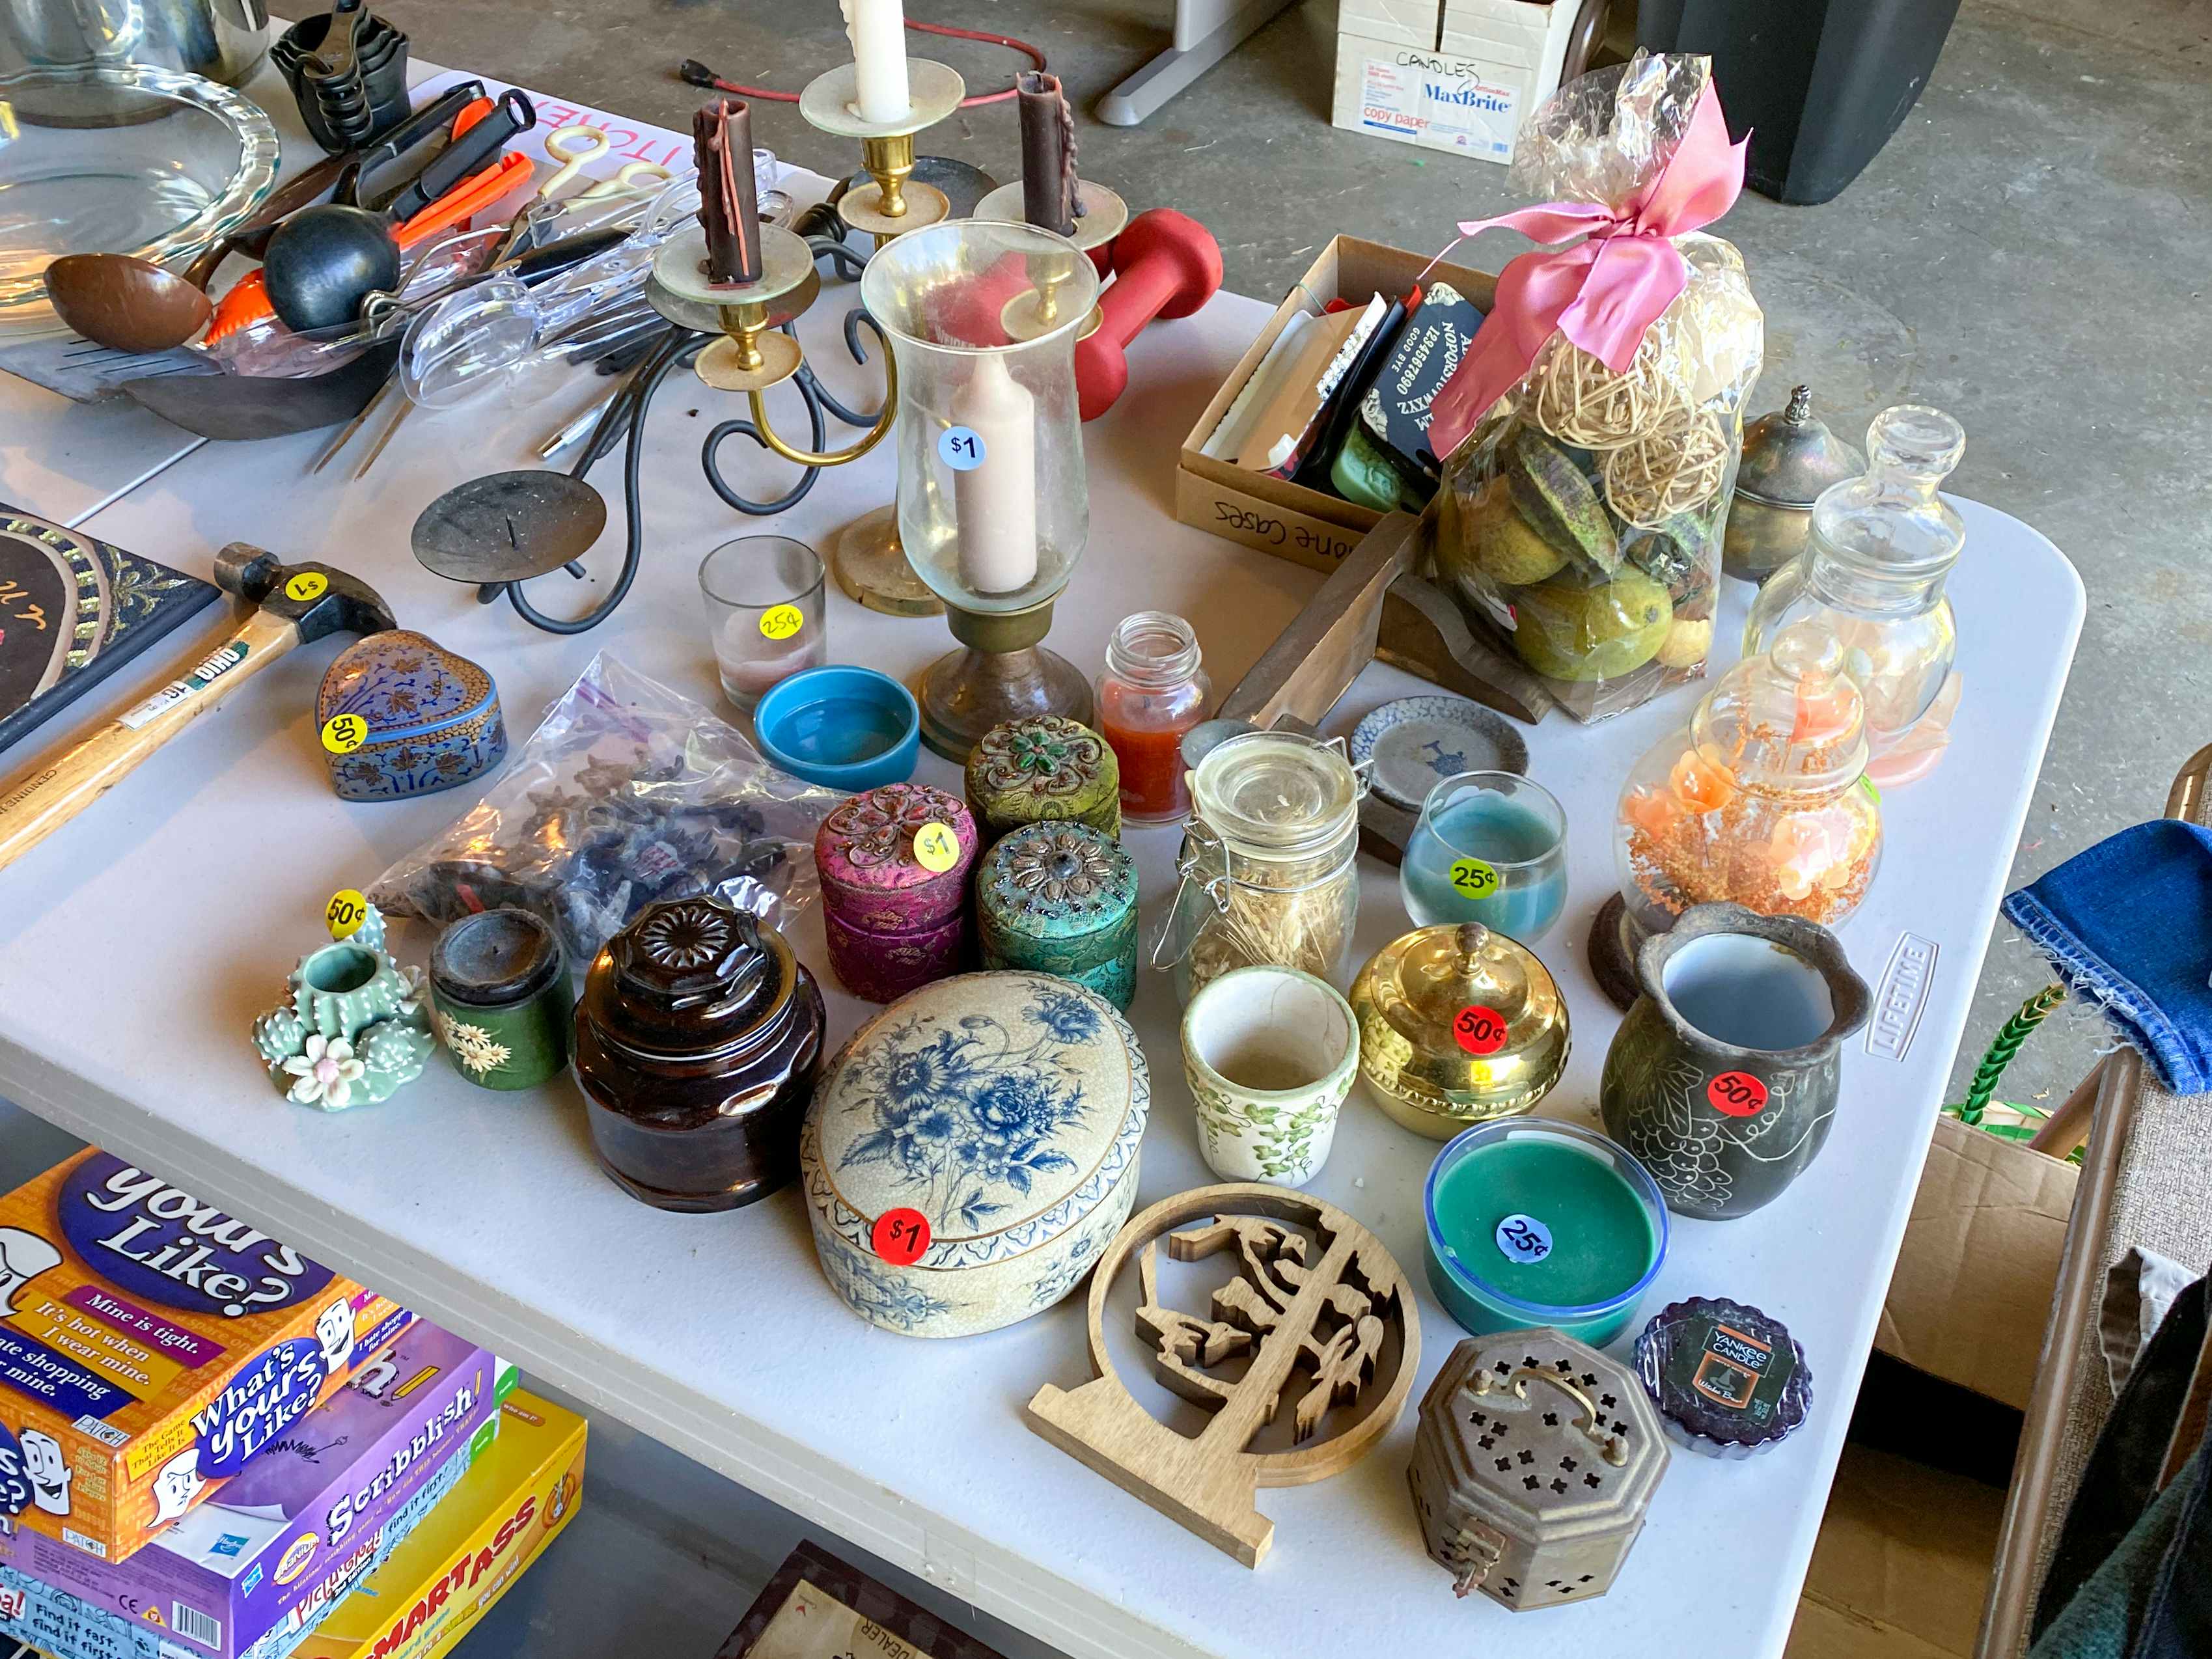 A table of knick-knacks in a garage sale